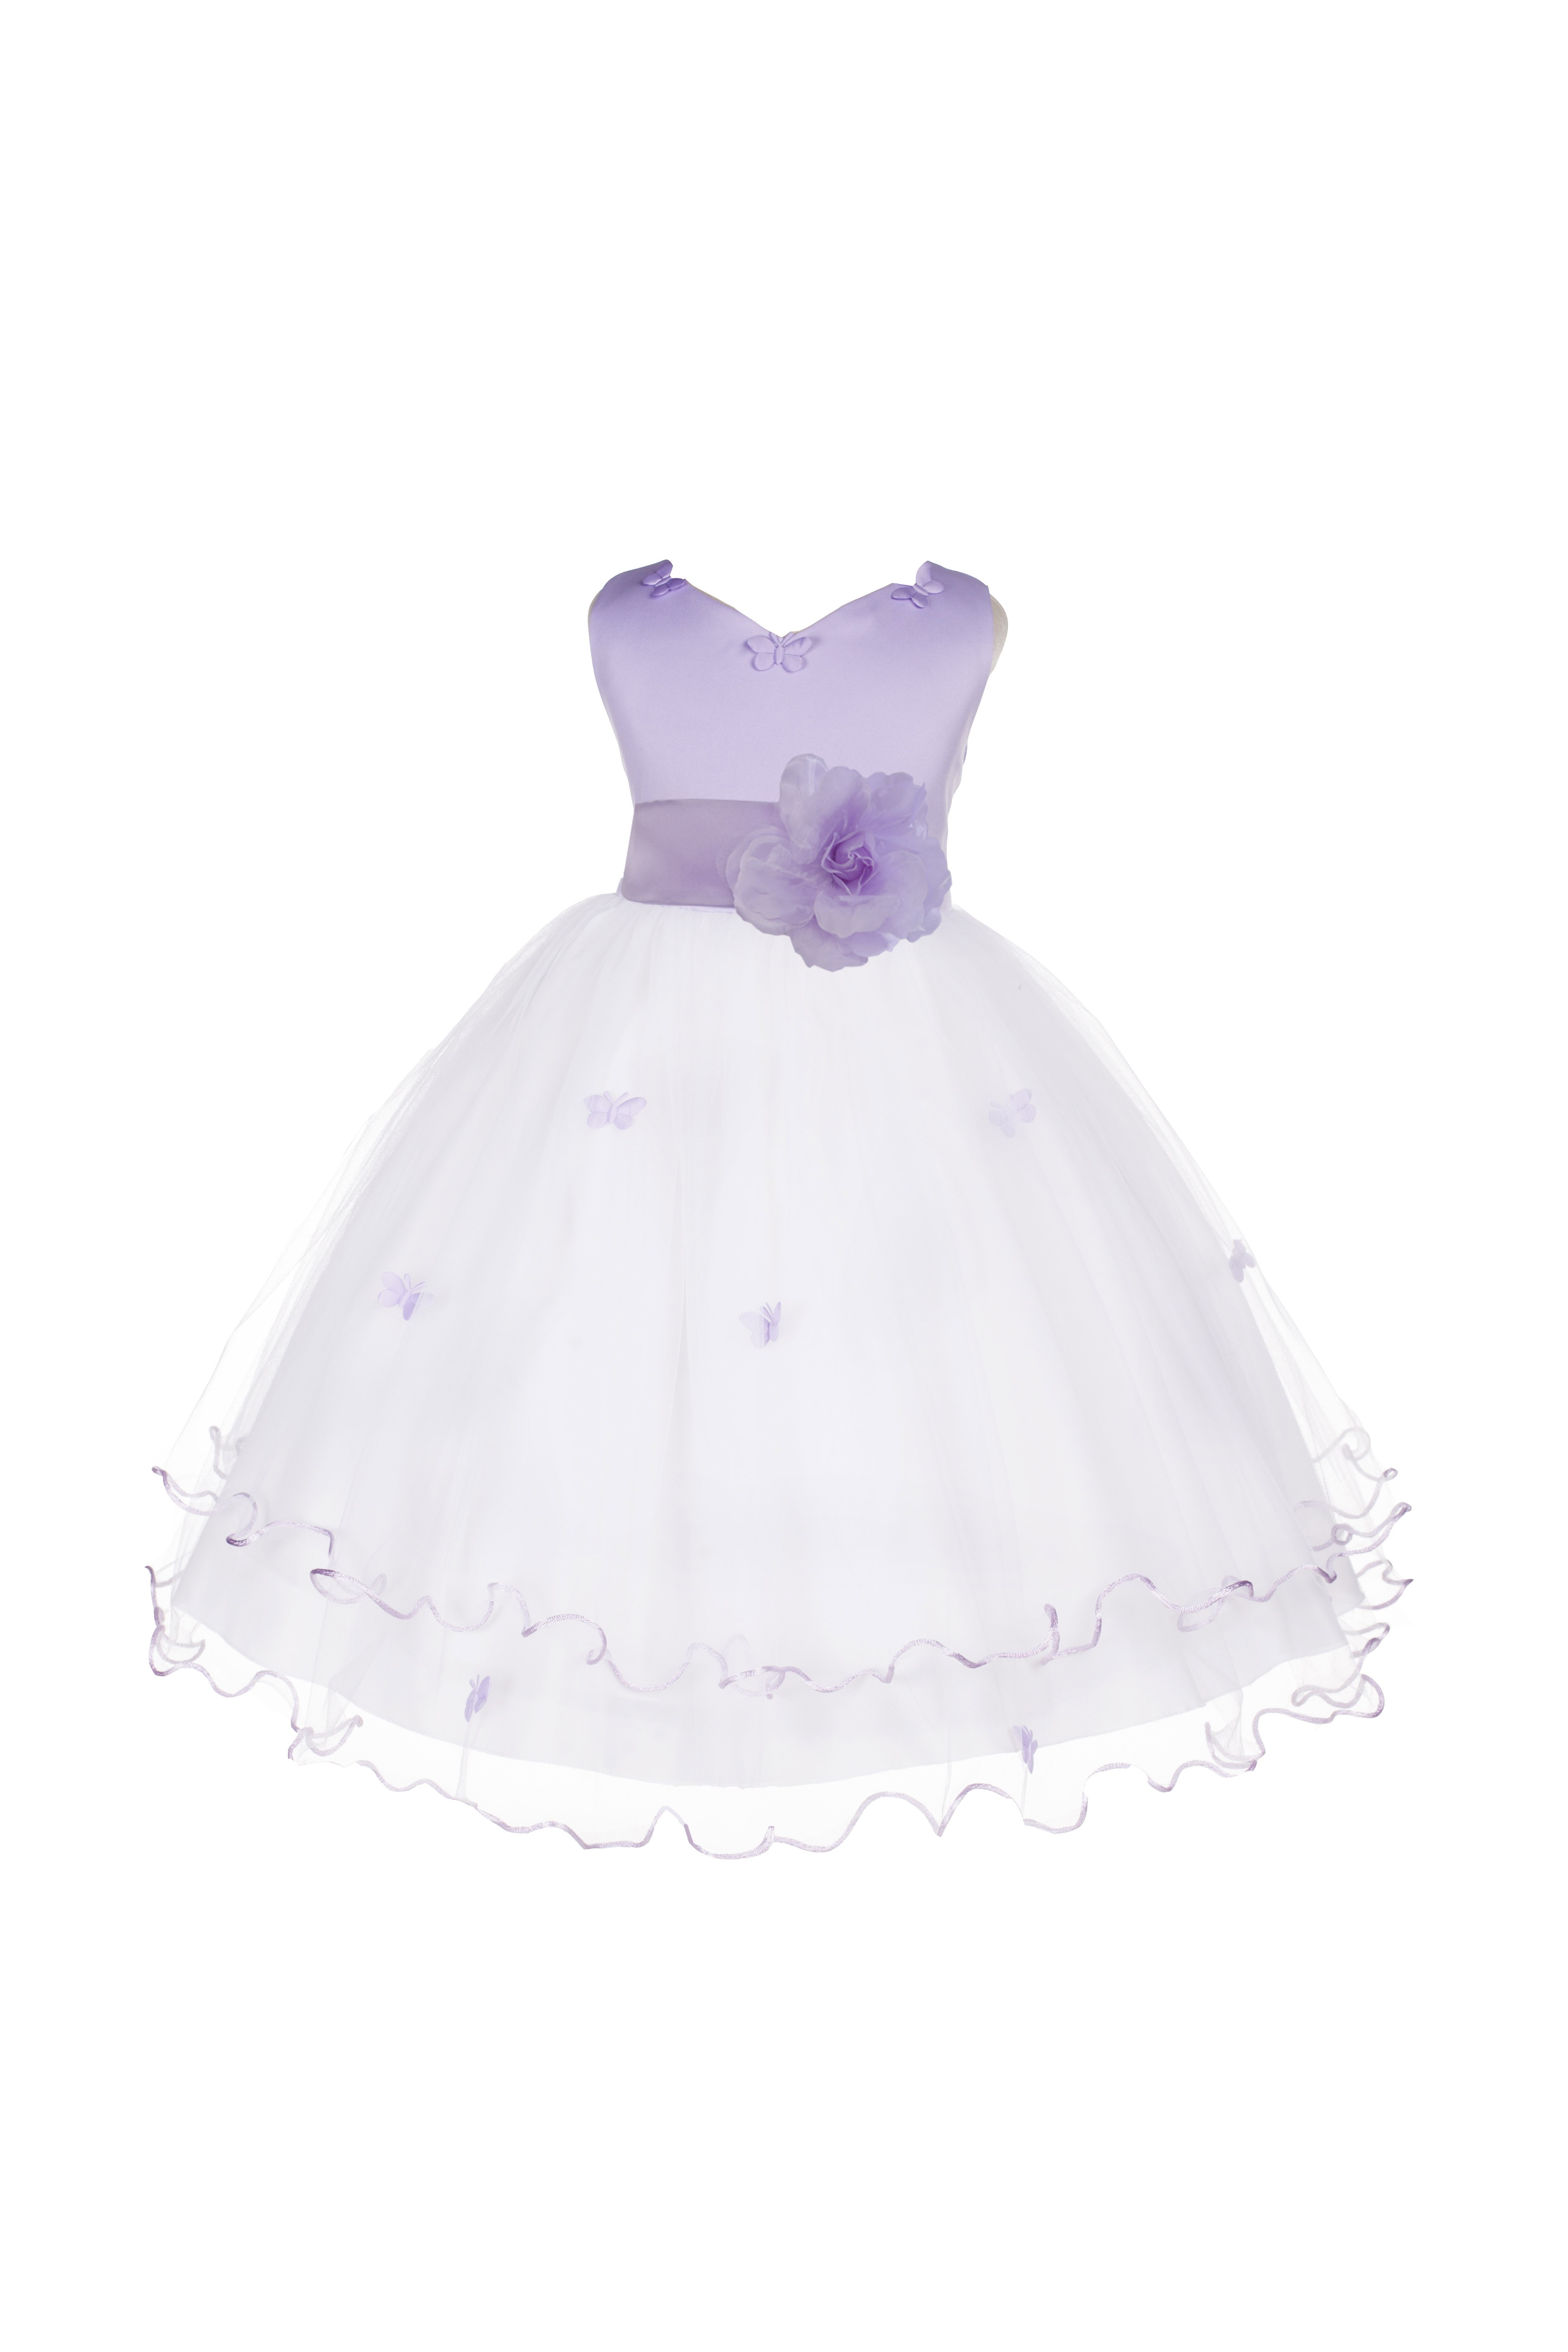 Lilac Satin Tulle Butterflies Flower Girl Dress Occasions 801T